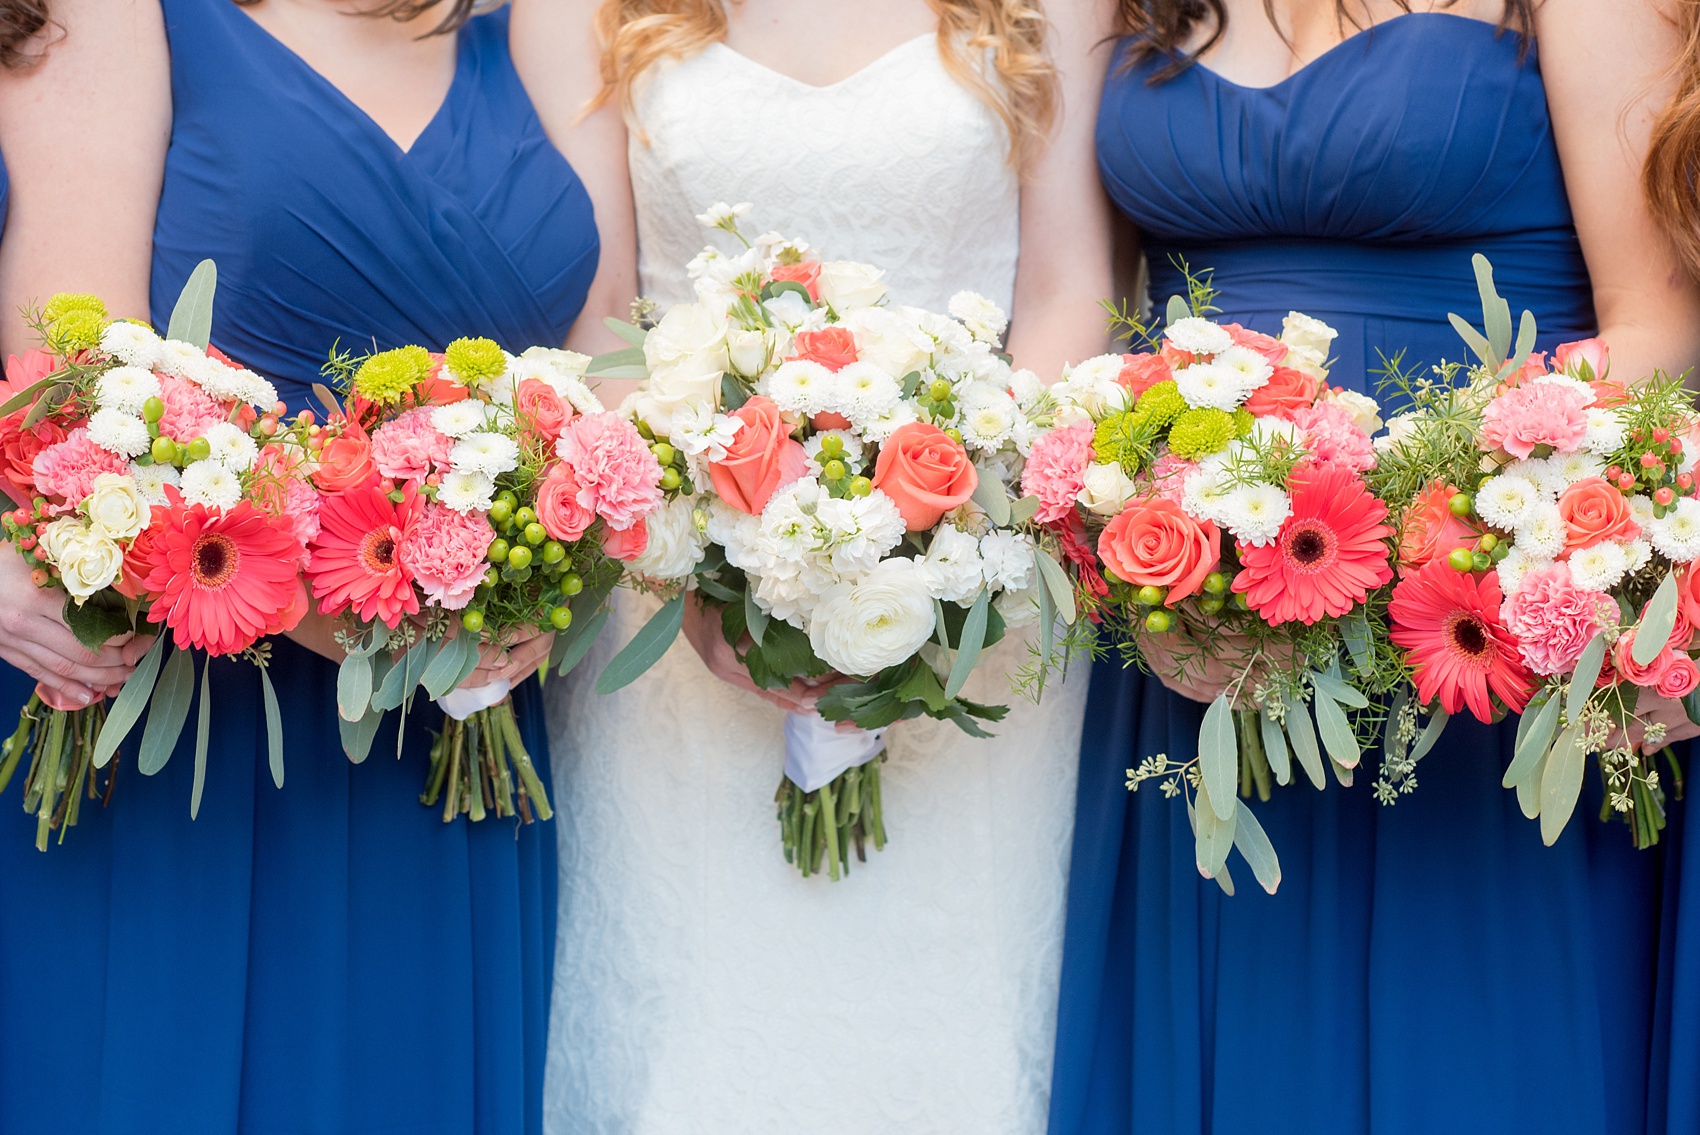 Mikkel Paige Photography photos from a wedding at The Stockroom at 230. A picture of the bride and her bridesmaids in cobalt blue in downtown Raleigh with coral and white bouquets.